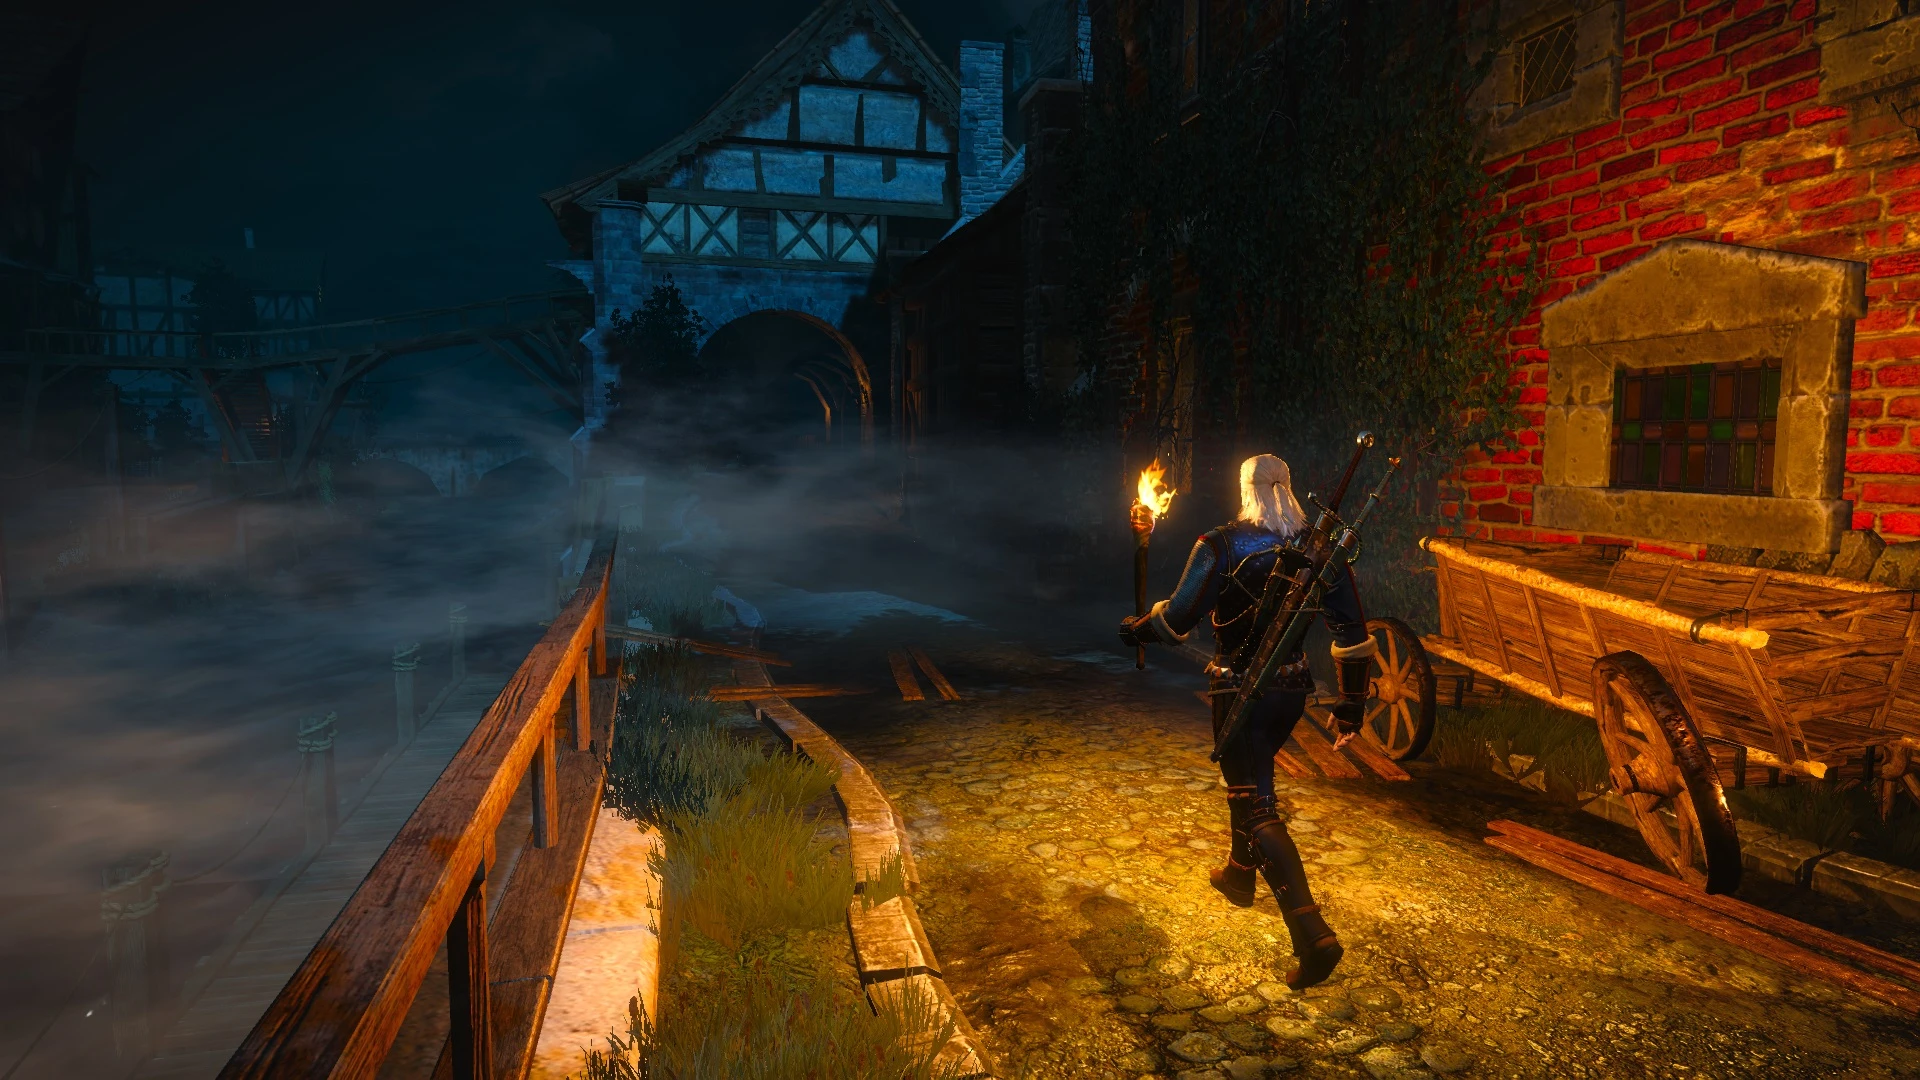 The witcher 3 console nexus фото 1